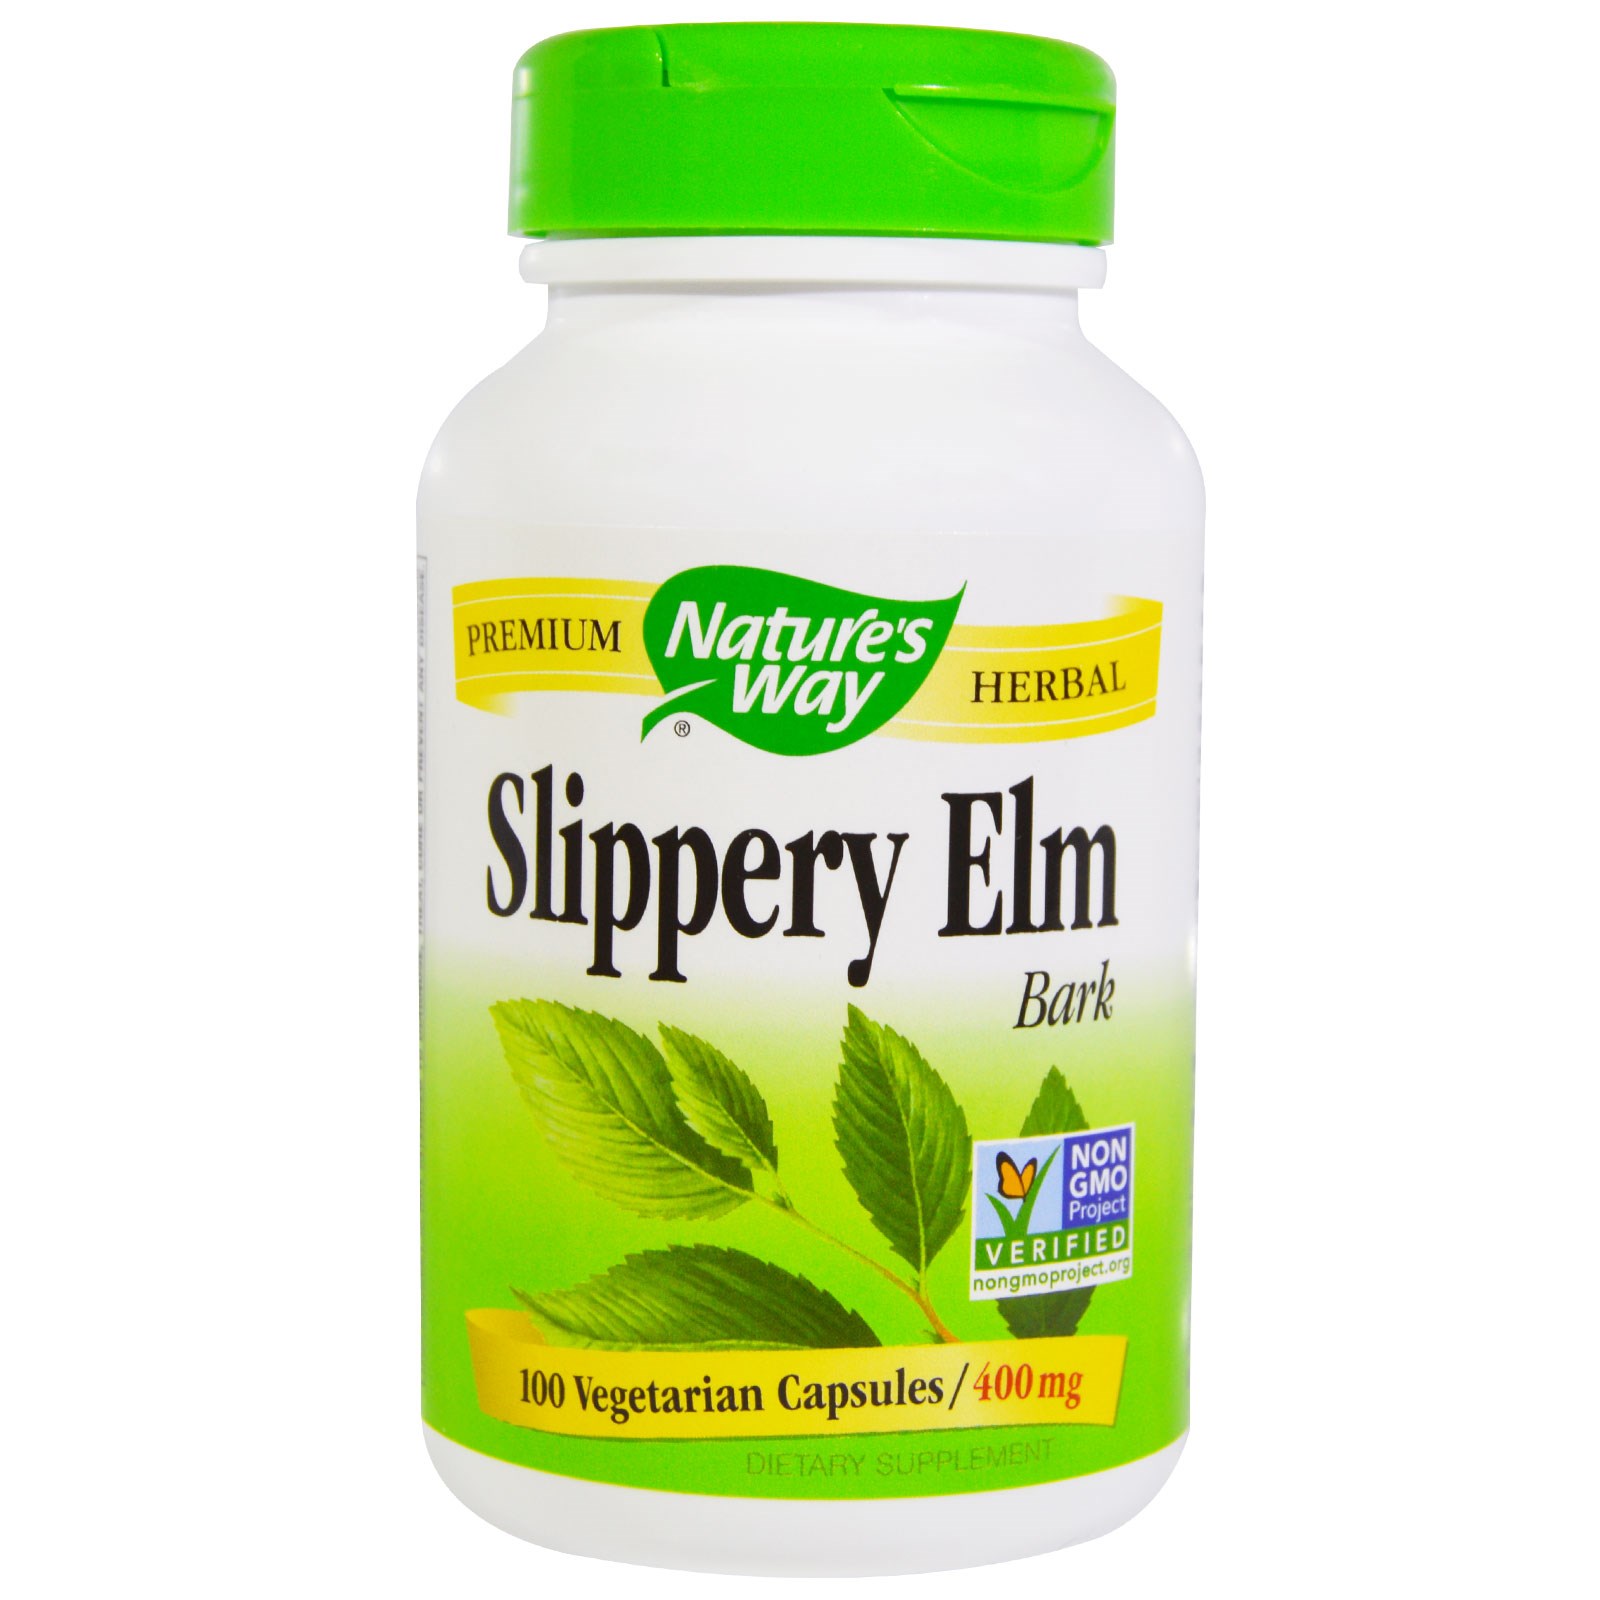 Slippery Elm Bark by Nature's Way 400mg (100 caps) - The Plan